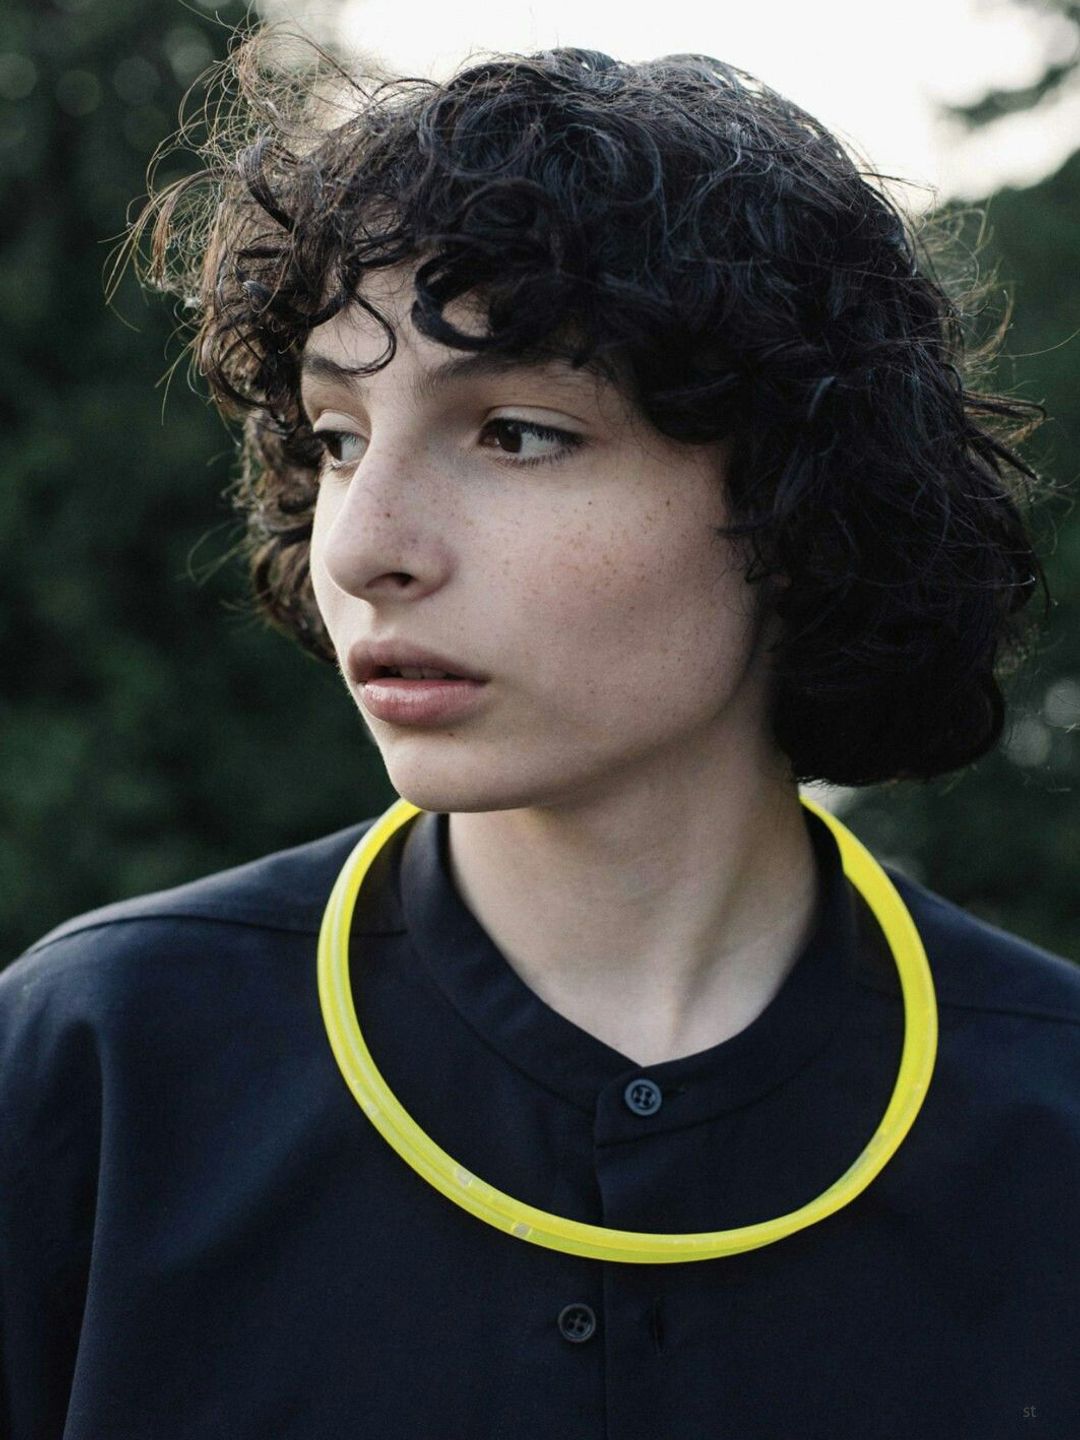 Finn Wolfhard who are his parents